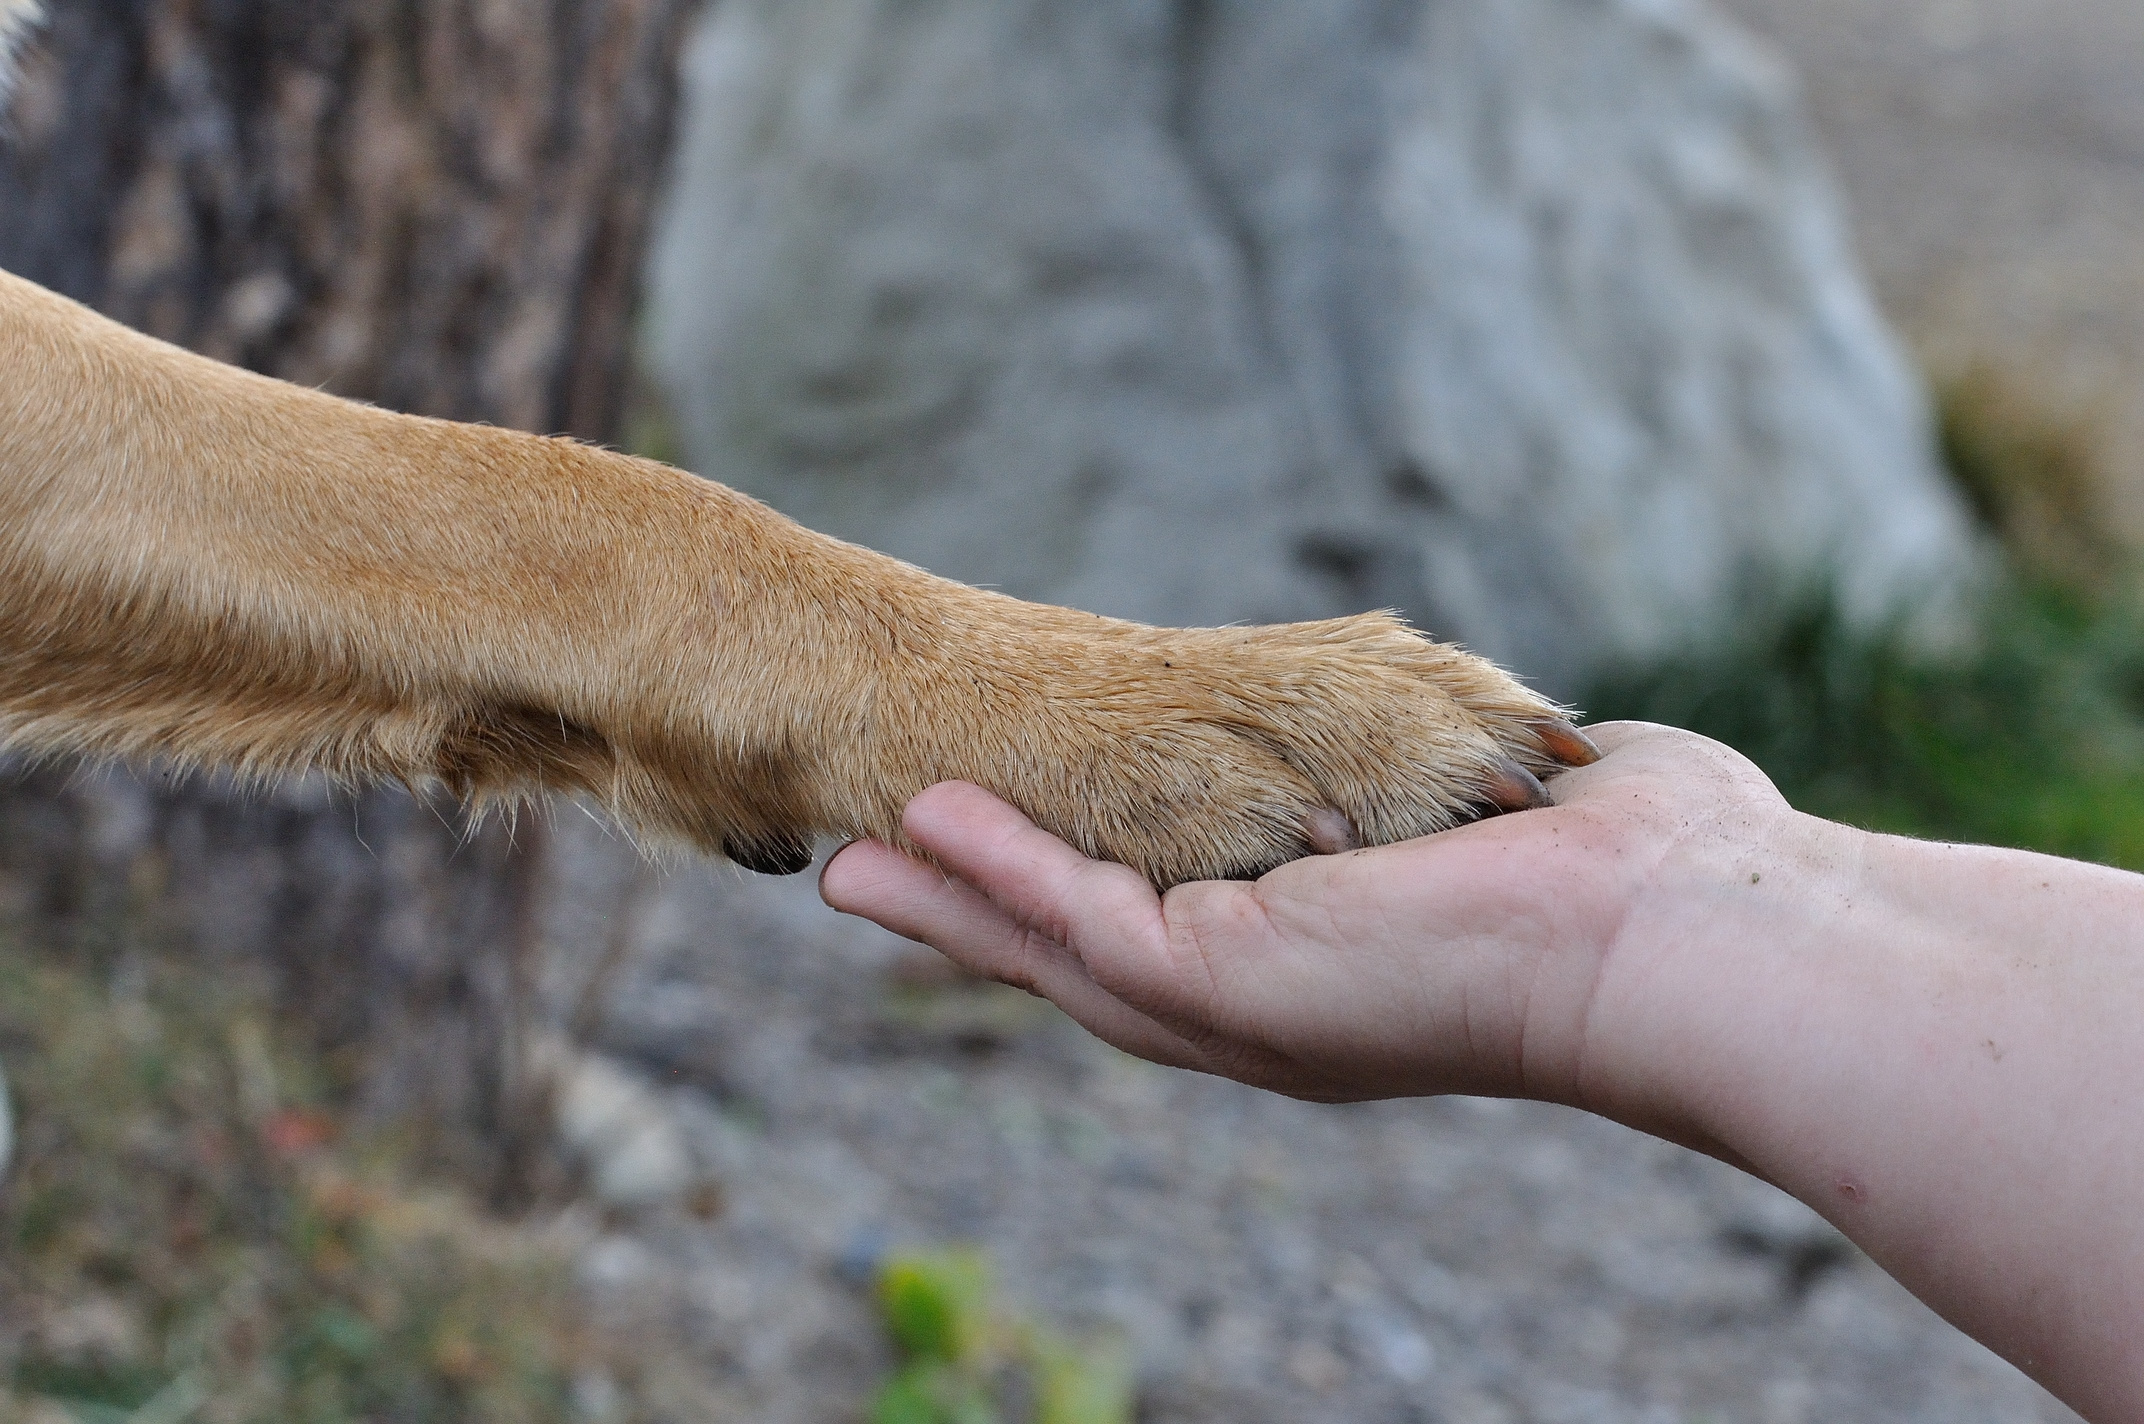 Paw of a Dog on a Human Hand